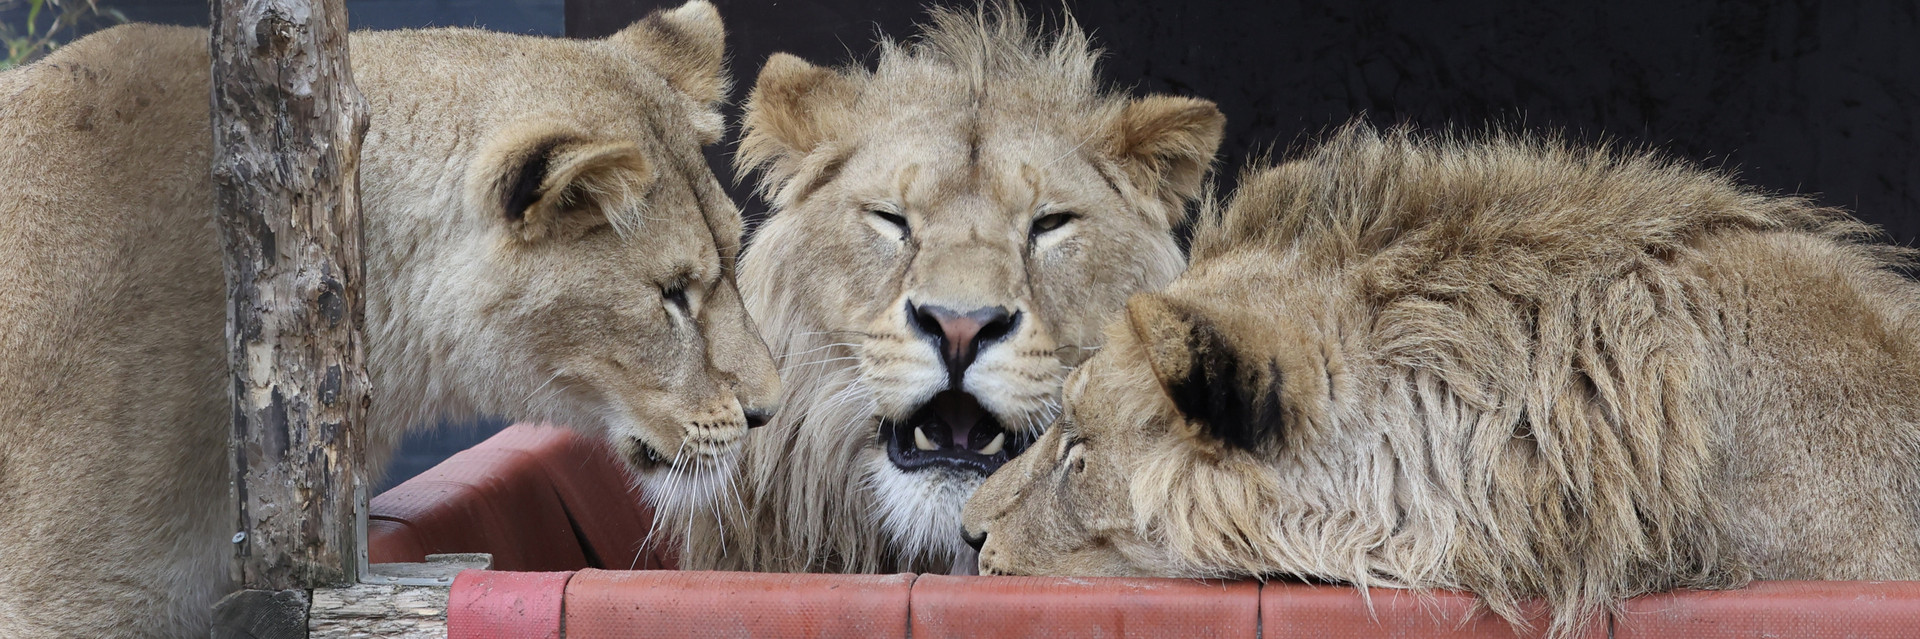 Lions Geena (left), Vincent (middle) and Roman (right)